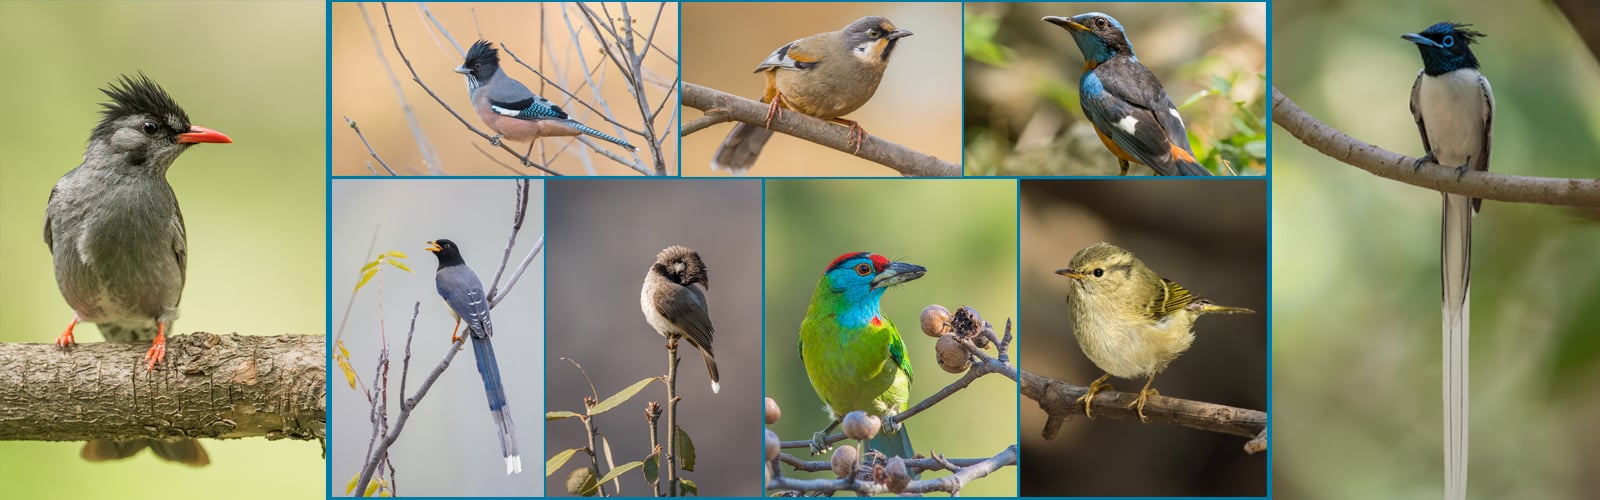 Believe it or not--these birds are found in Pakistan